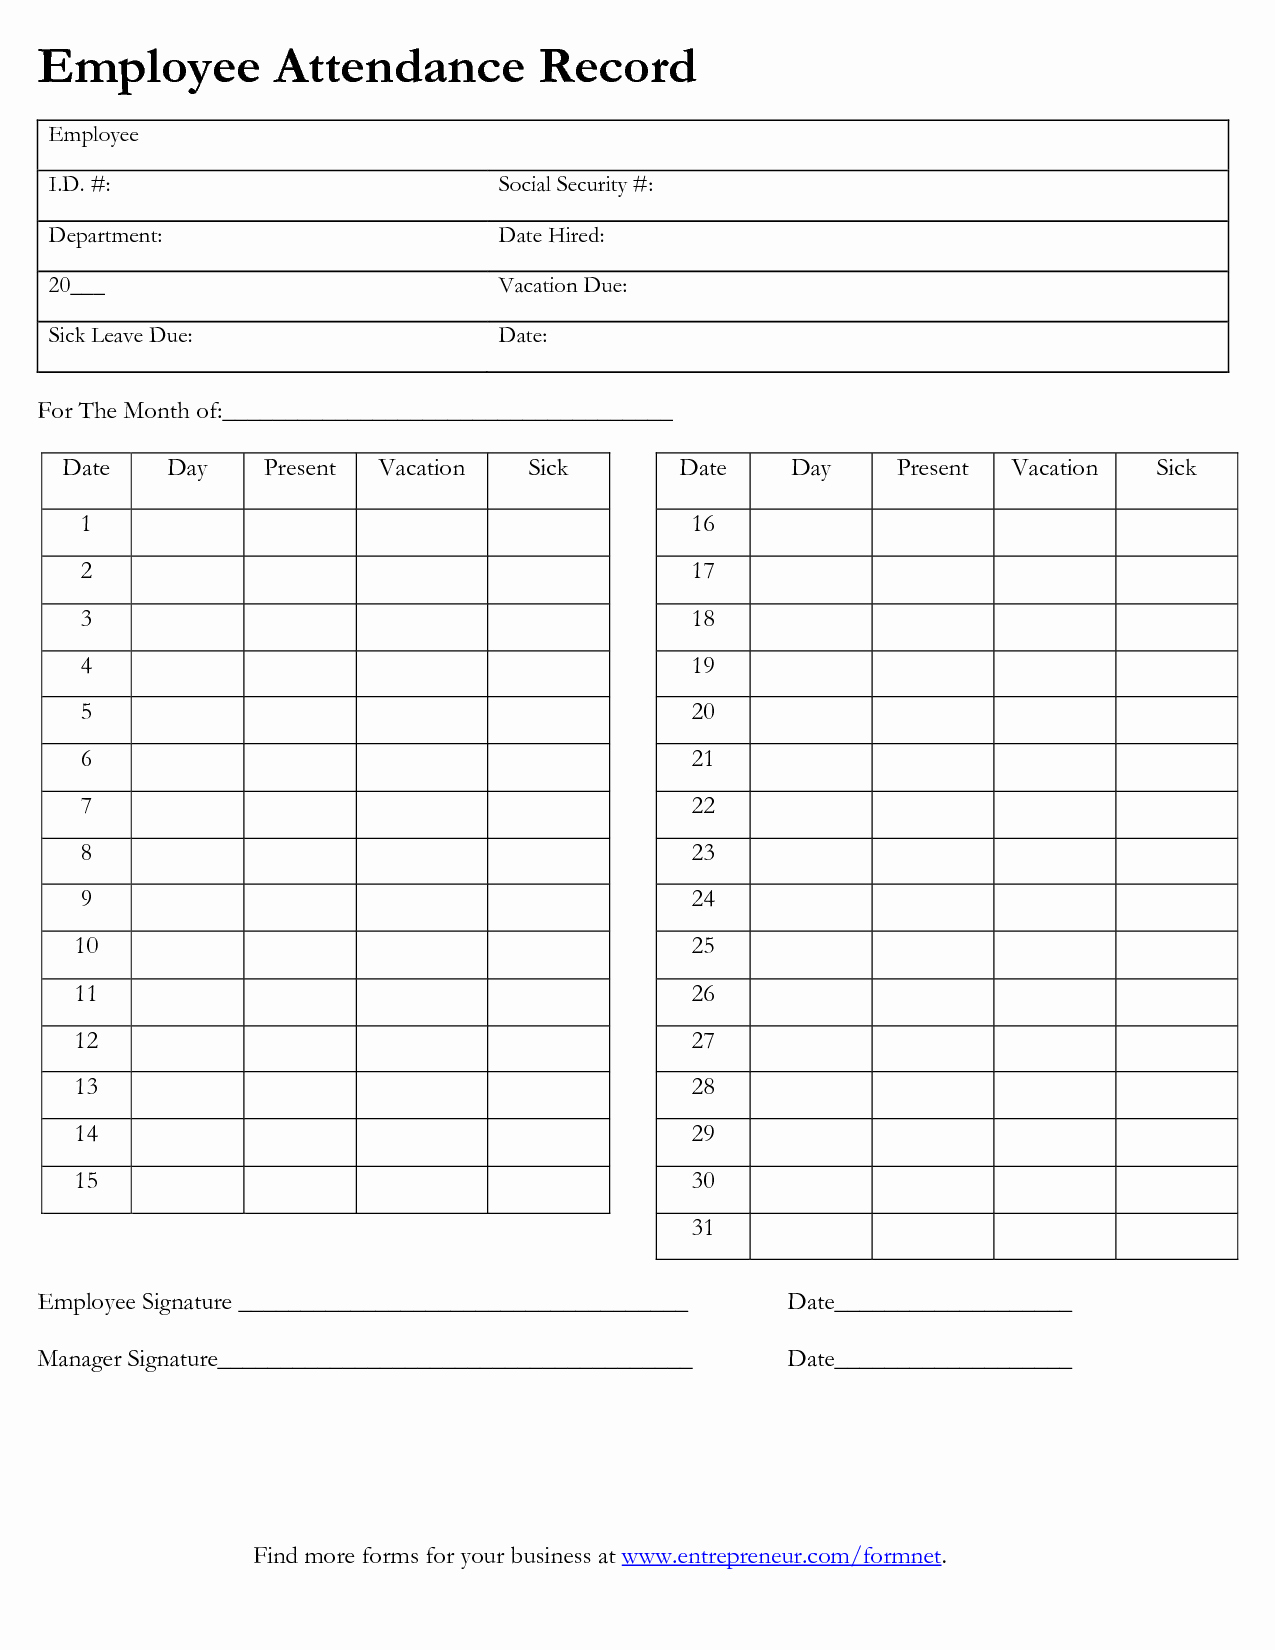 Employee attendance Record Template Lovely Employee attendance Record